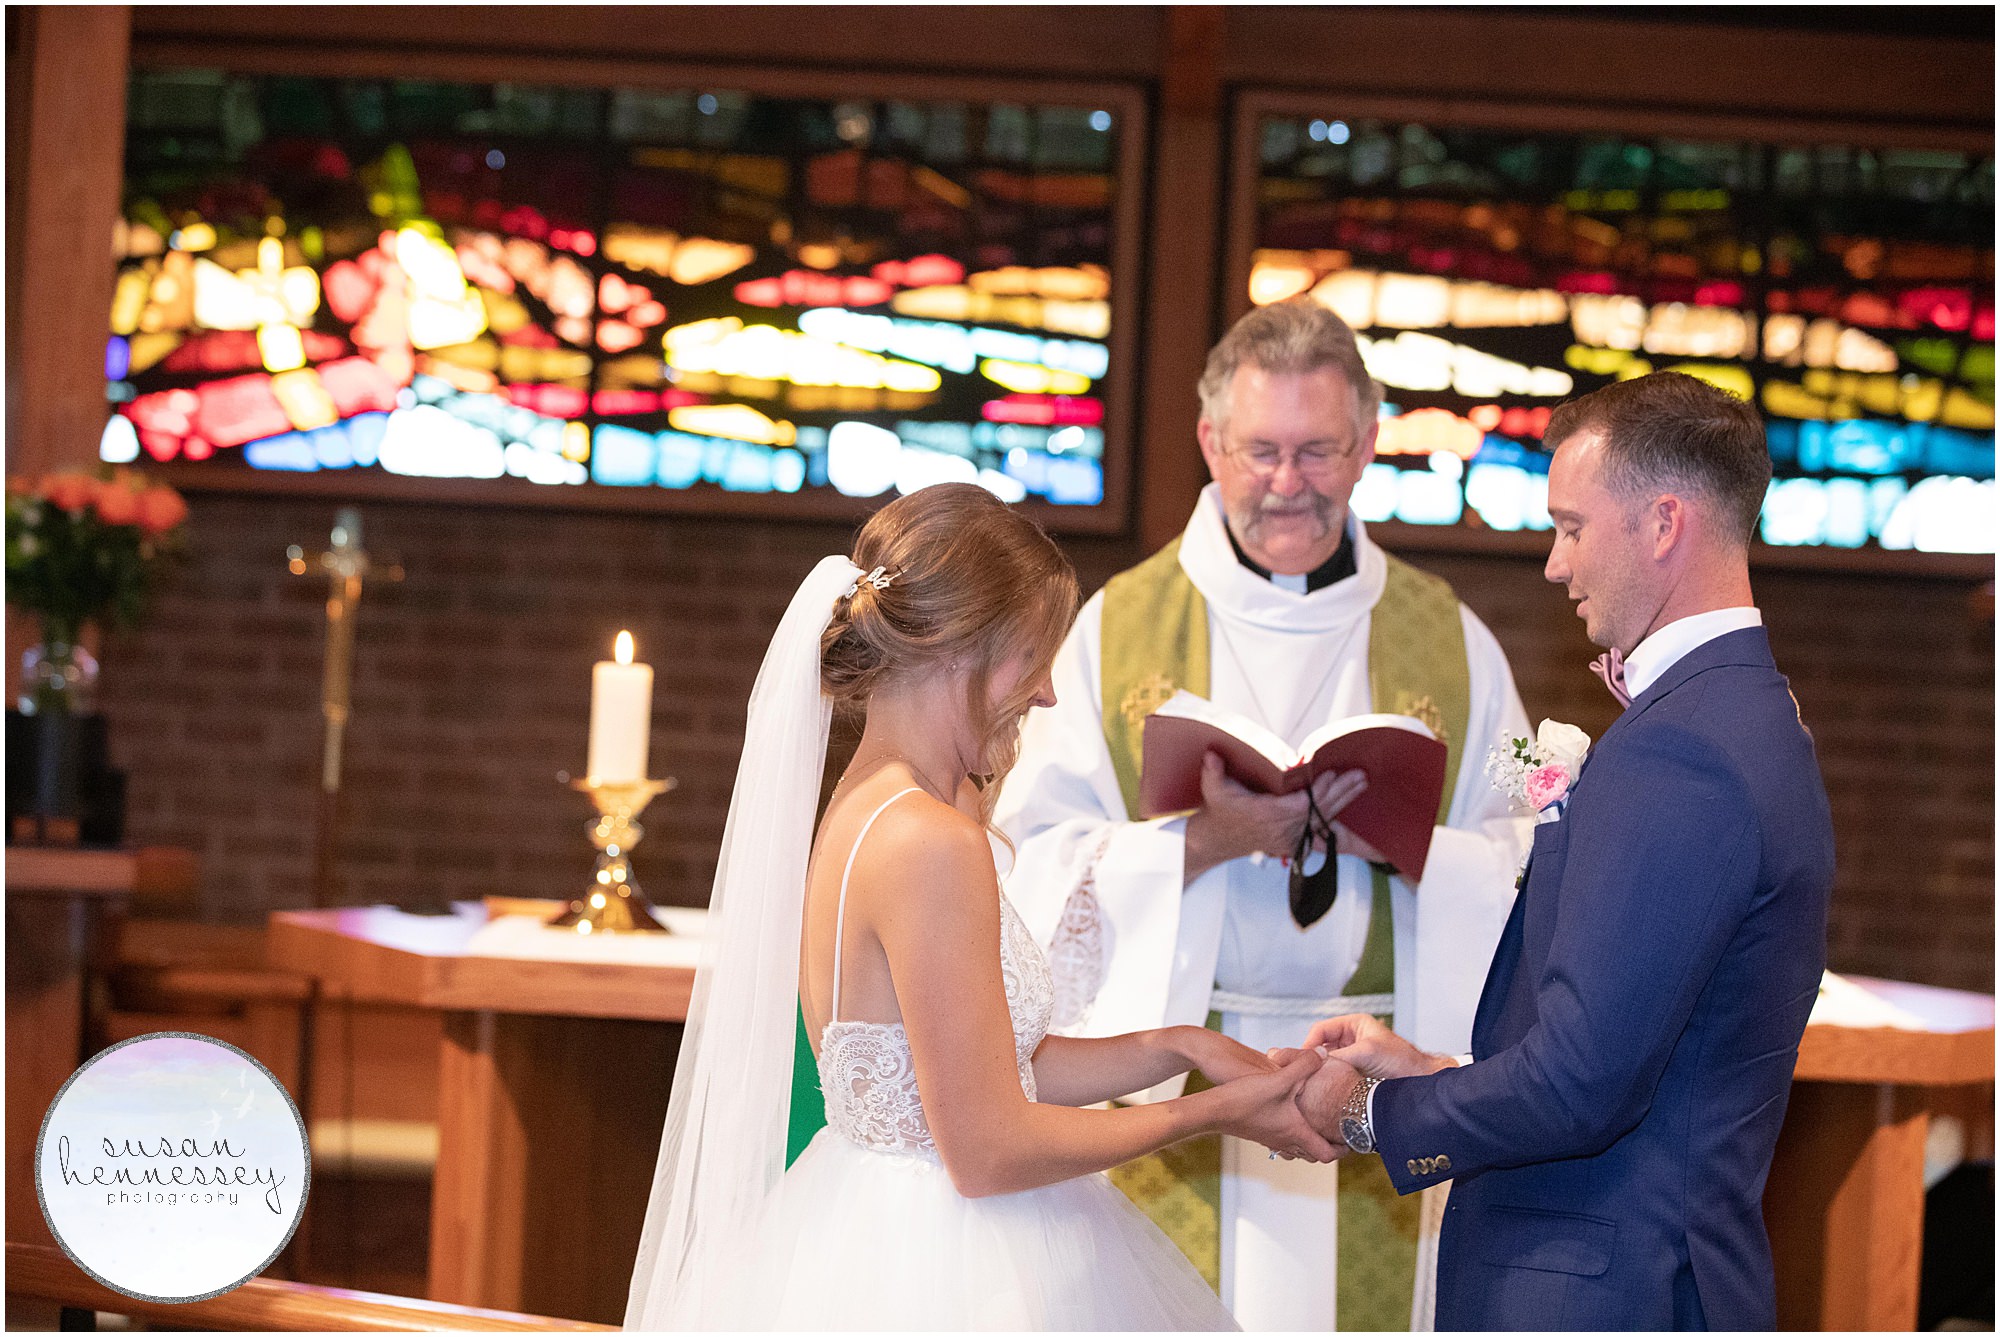 Groom places ring on bride's finger at church ceremony